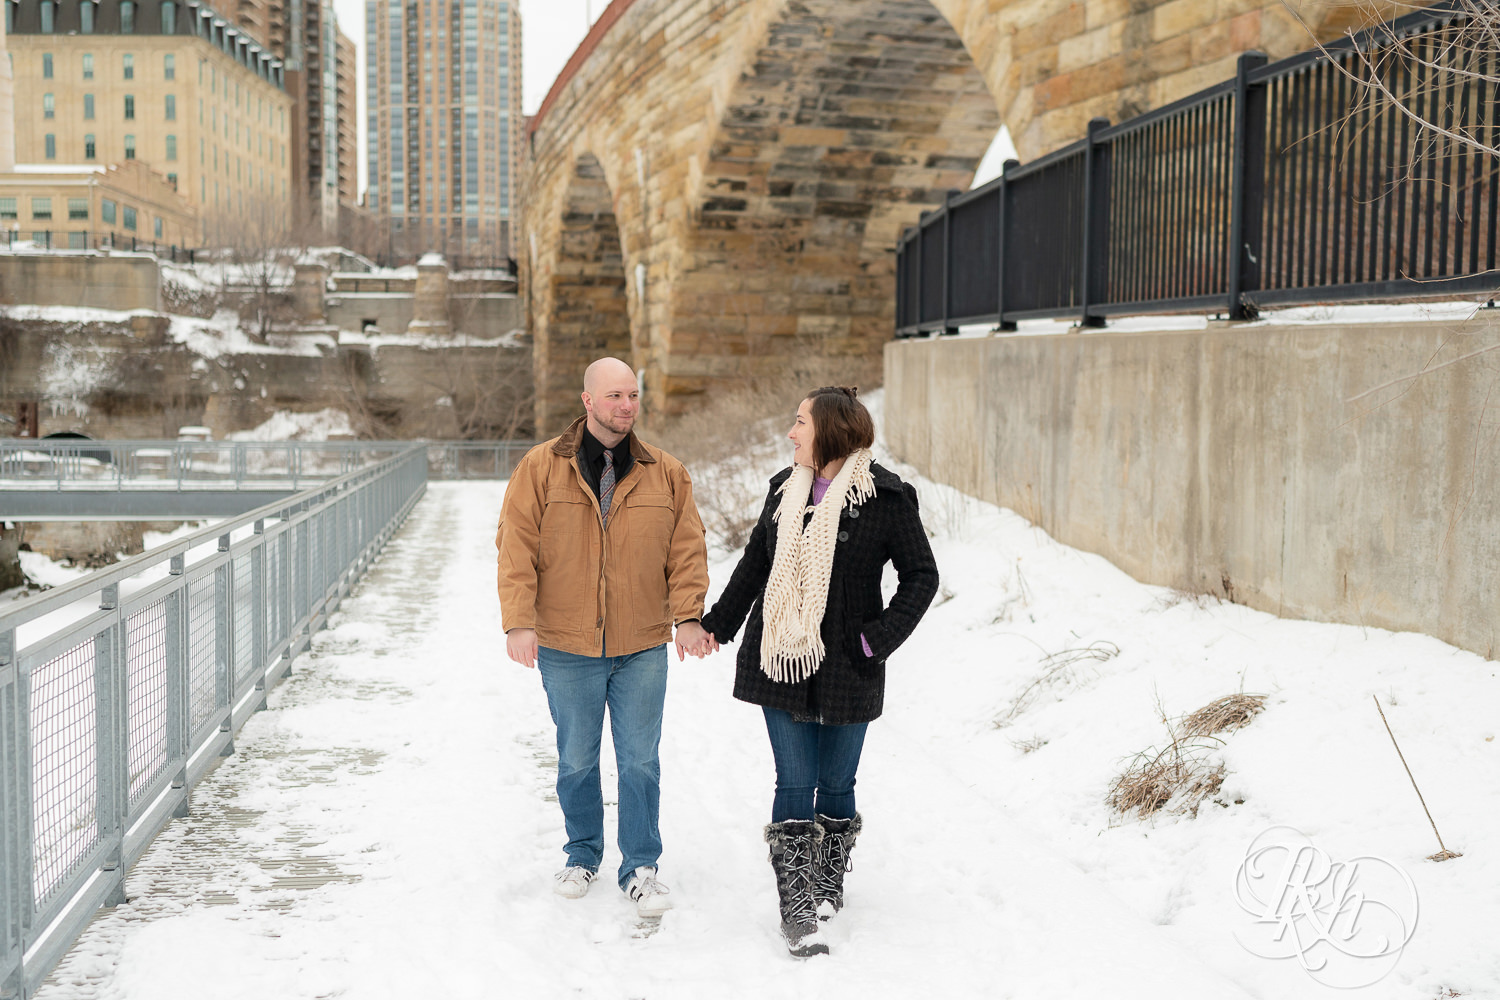 Man and woman walking in snow at Mill City Ruins in Minneapolis, Minnesota.